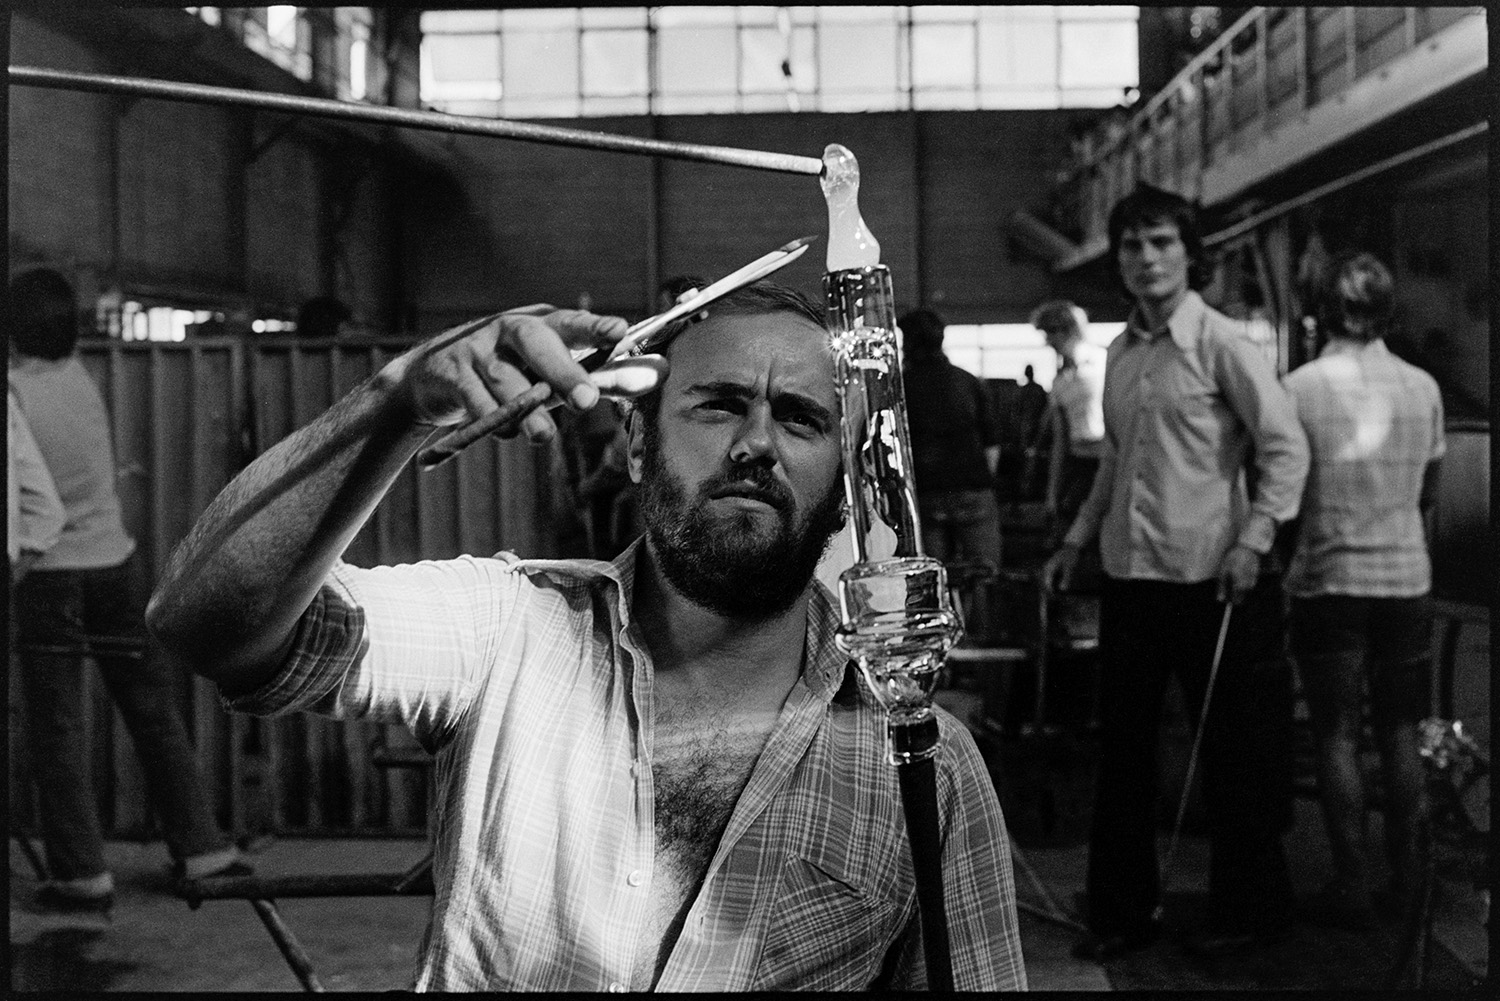 Management and workers at glass factory. 
[A man about to cut a piece of molten glass at the Dartington Glass factory, now known as Dartington Crystal, in Torrington. Other workers can be seen in the background.]